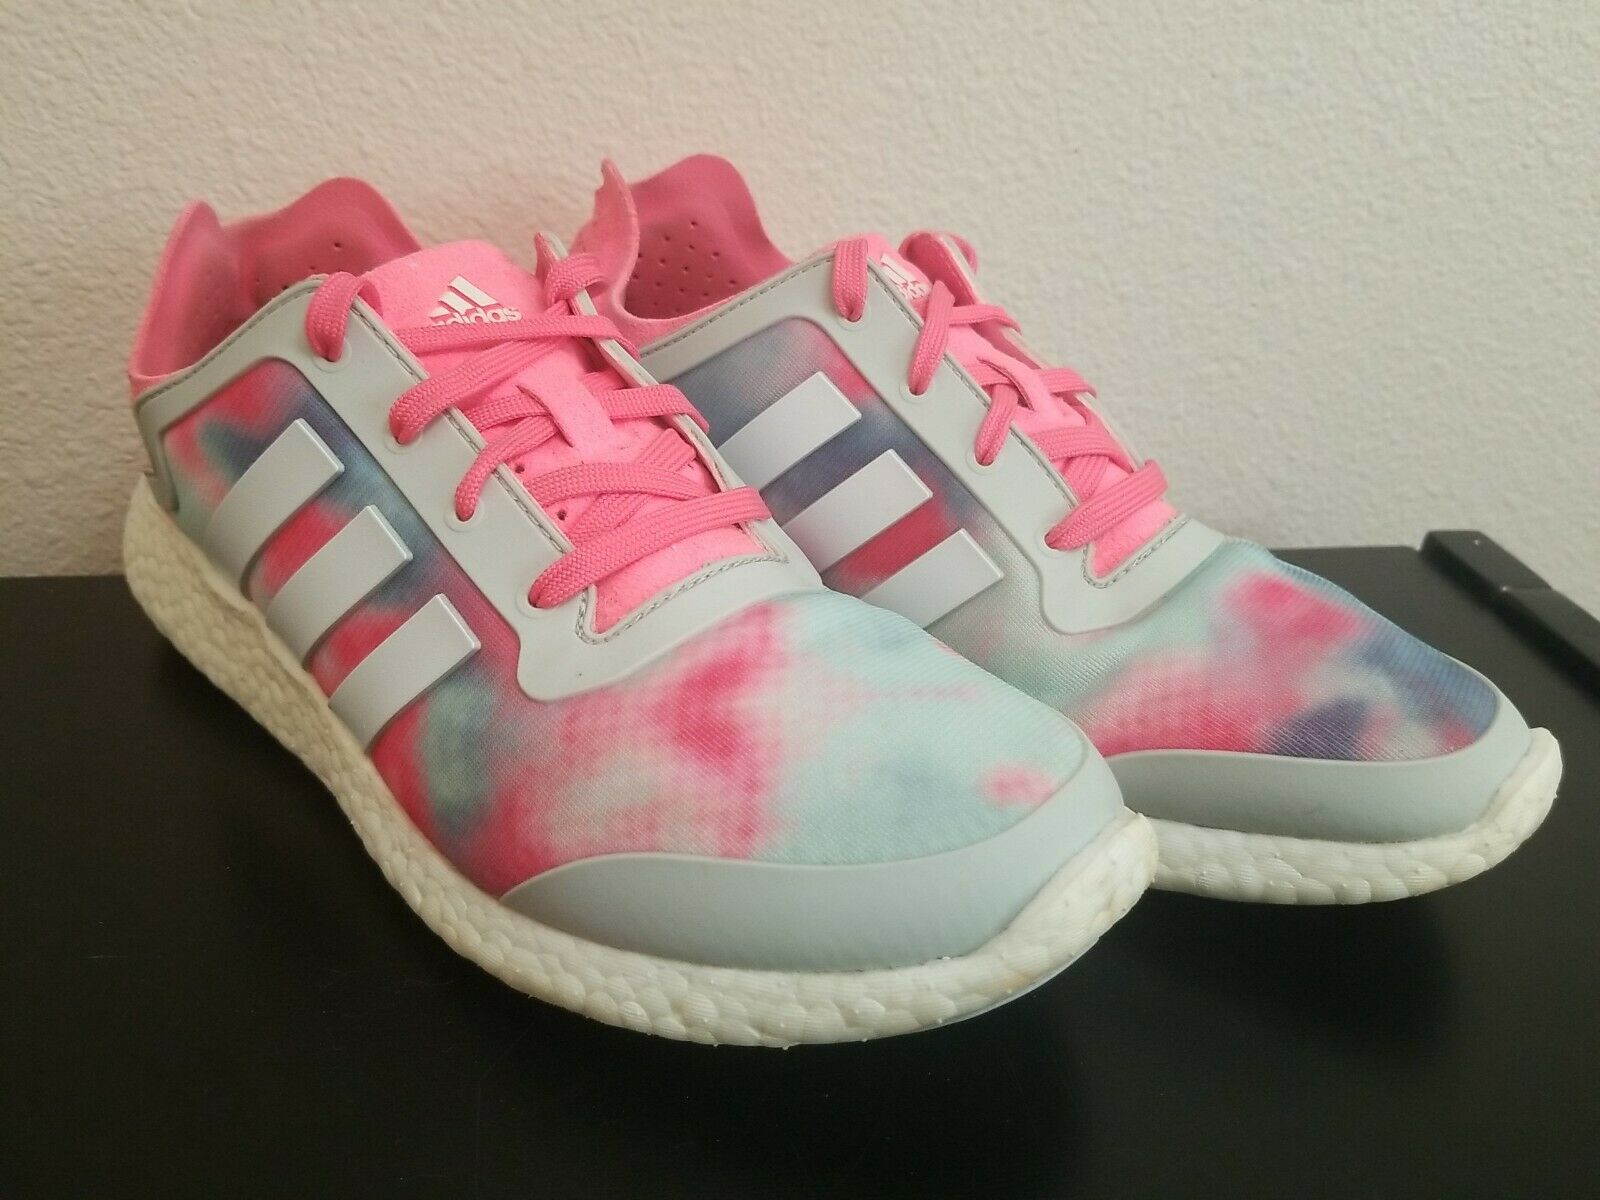 Adidas Pure Boost City Blur Running Shoes Women's Size 8.5 Pink Camo, No Insoles